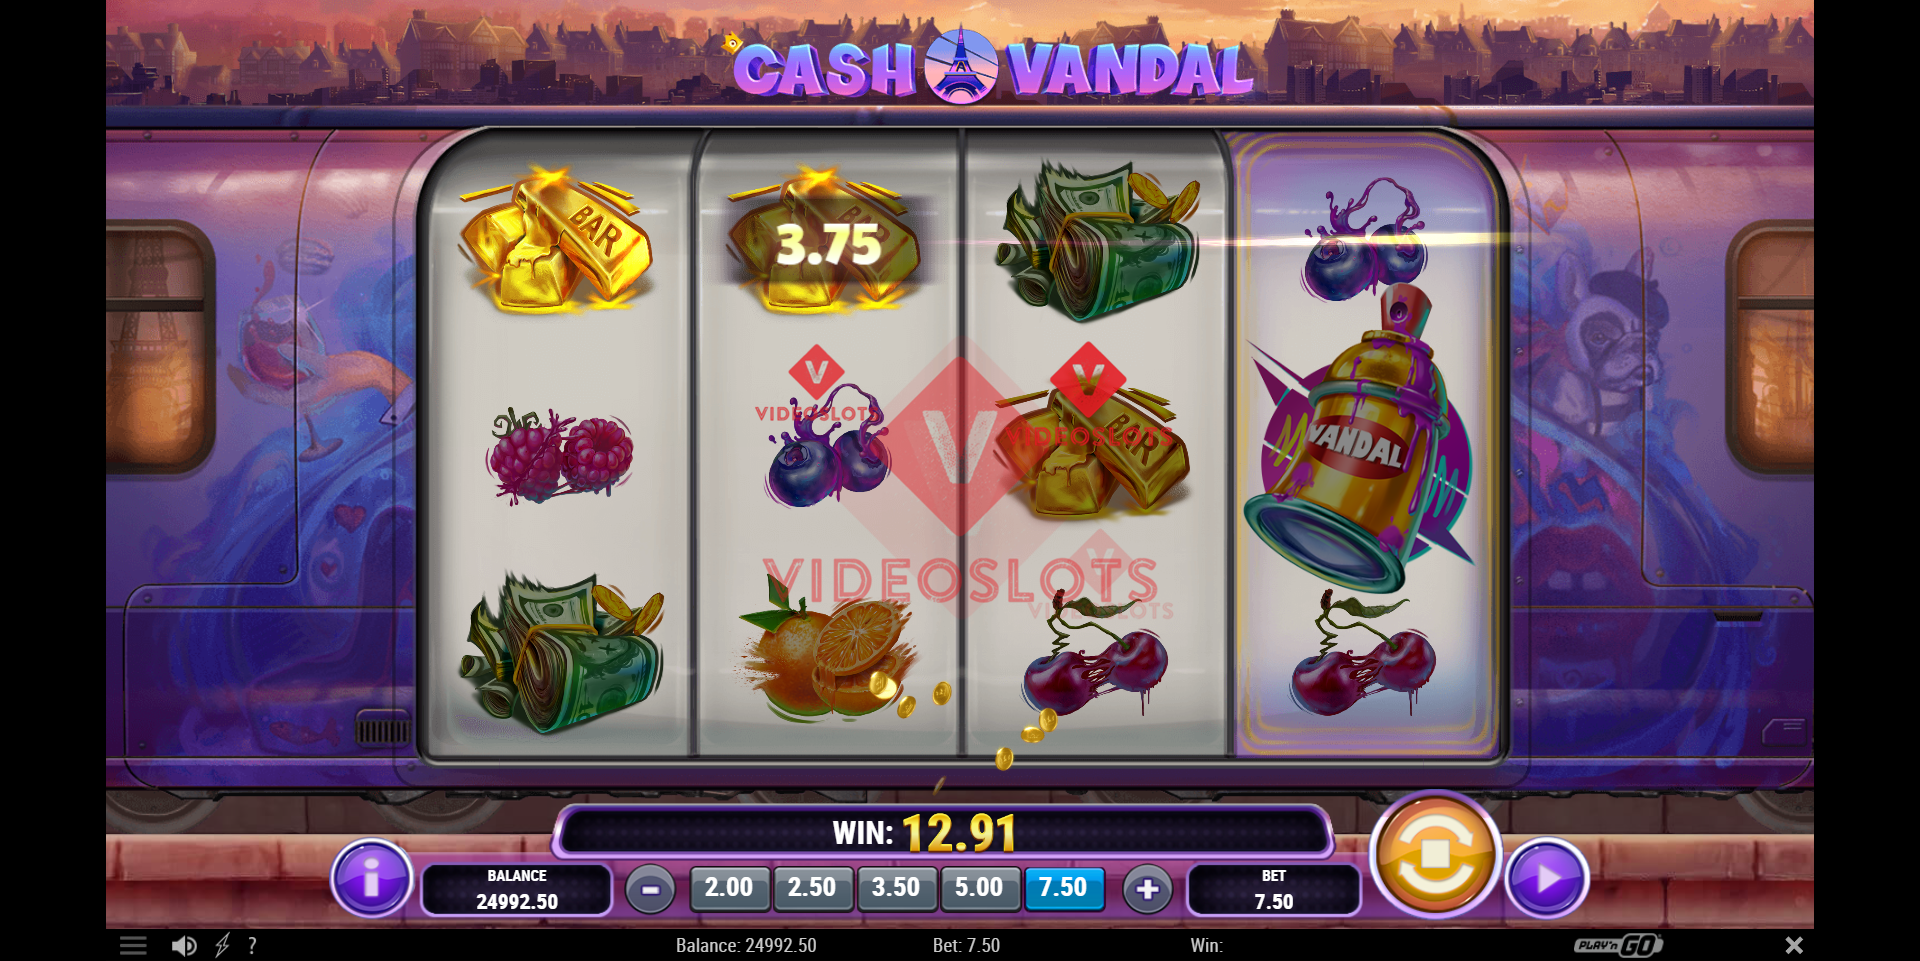 Base Game for Cash Vandal slot from Play'n Go